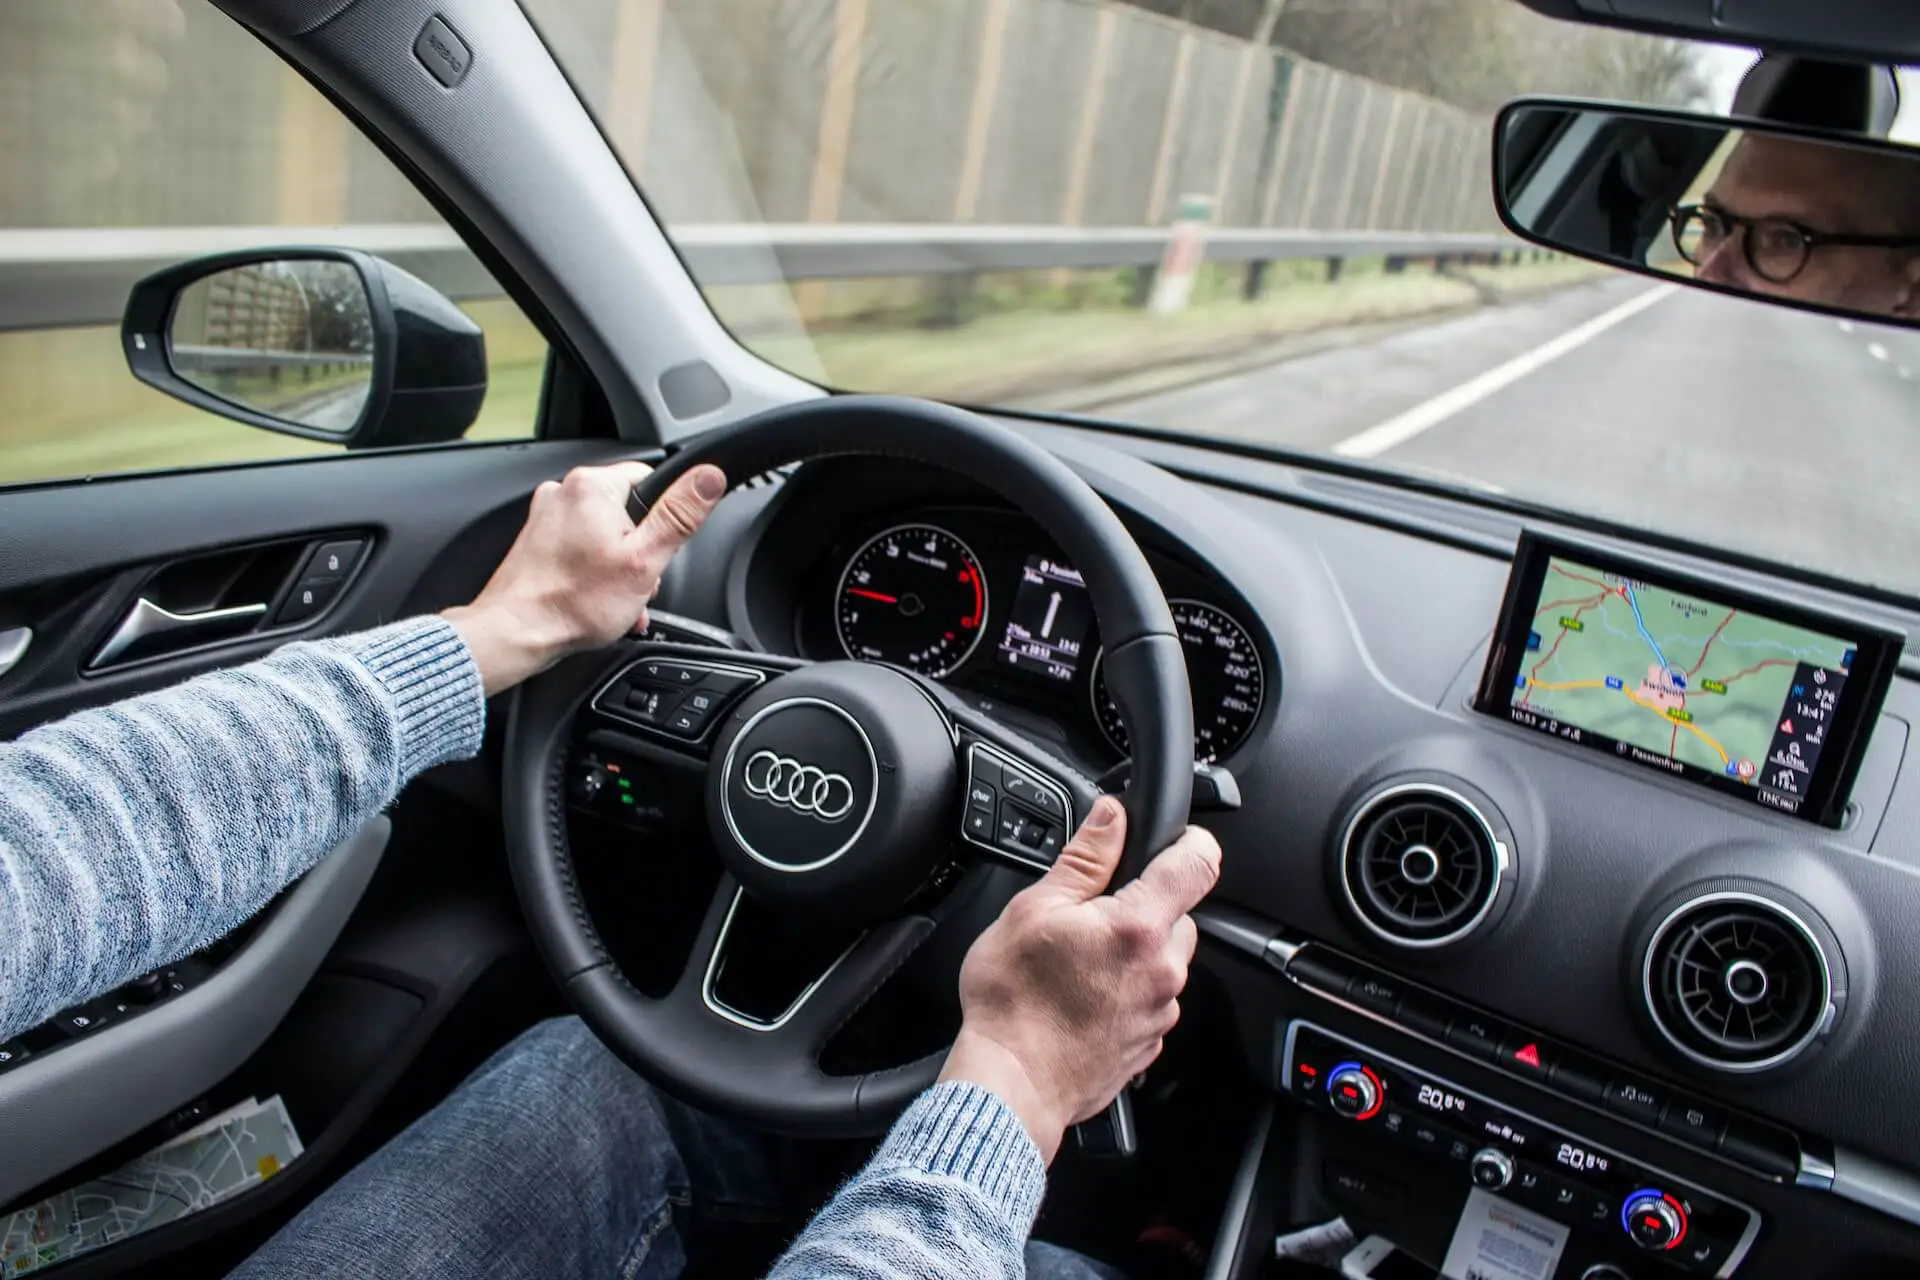 man with glasses gripping Audi steering wheel inside of car